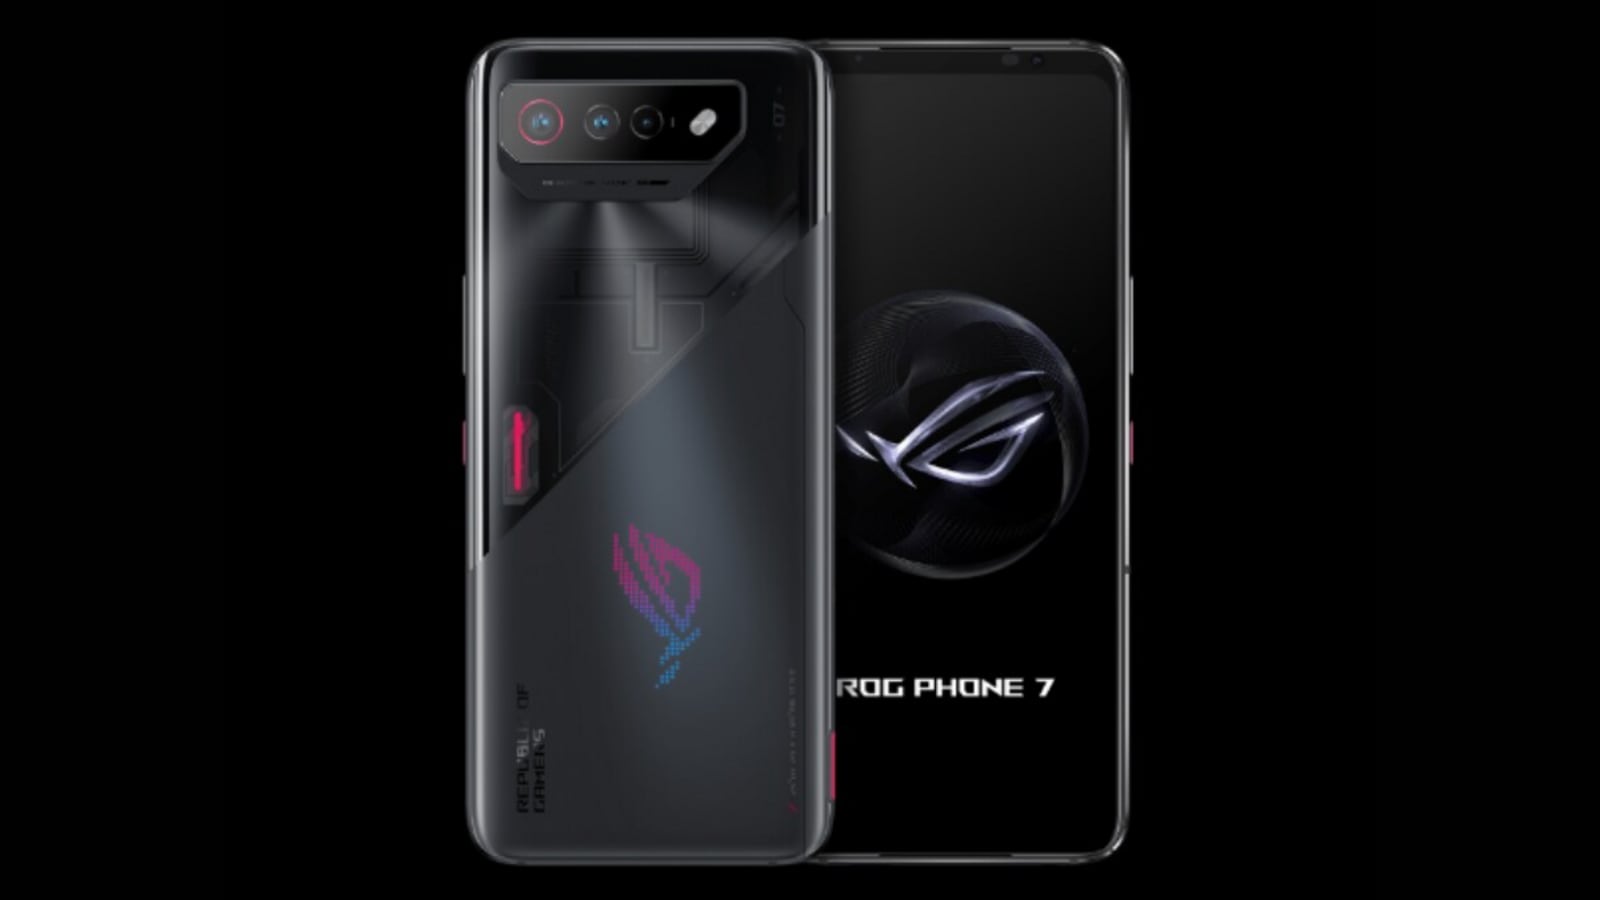 ASUS ROG Phone 8 teaser turns up with Snapdragon 8 Gen 3 reference -   News